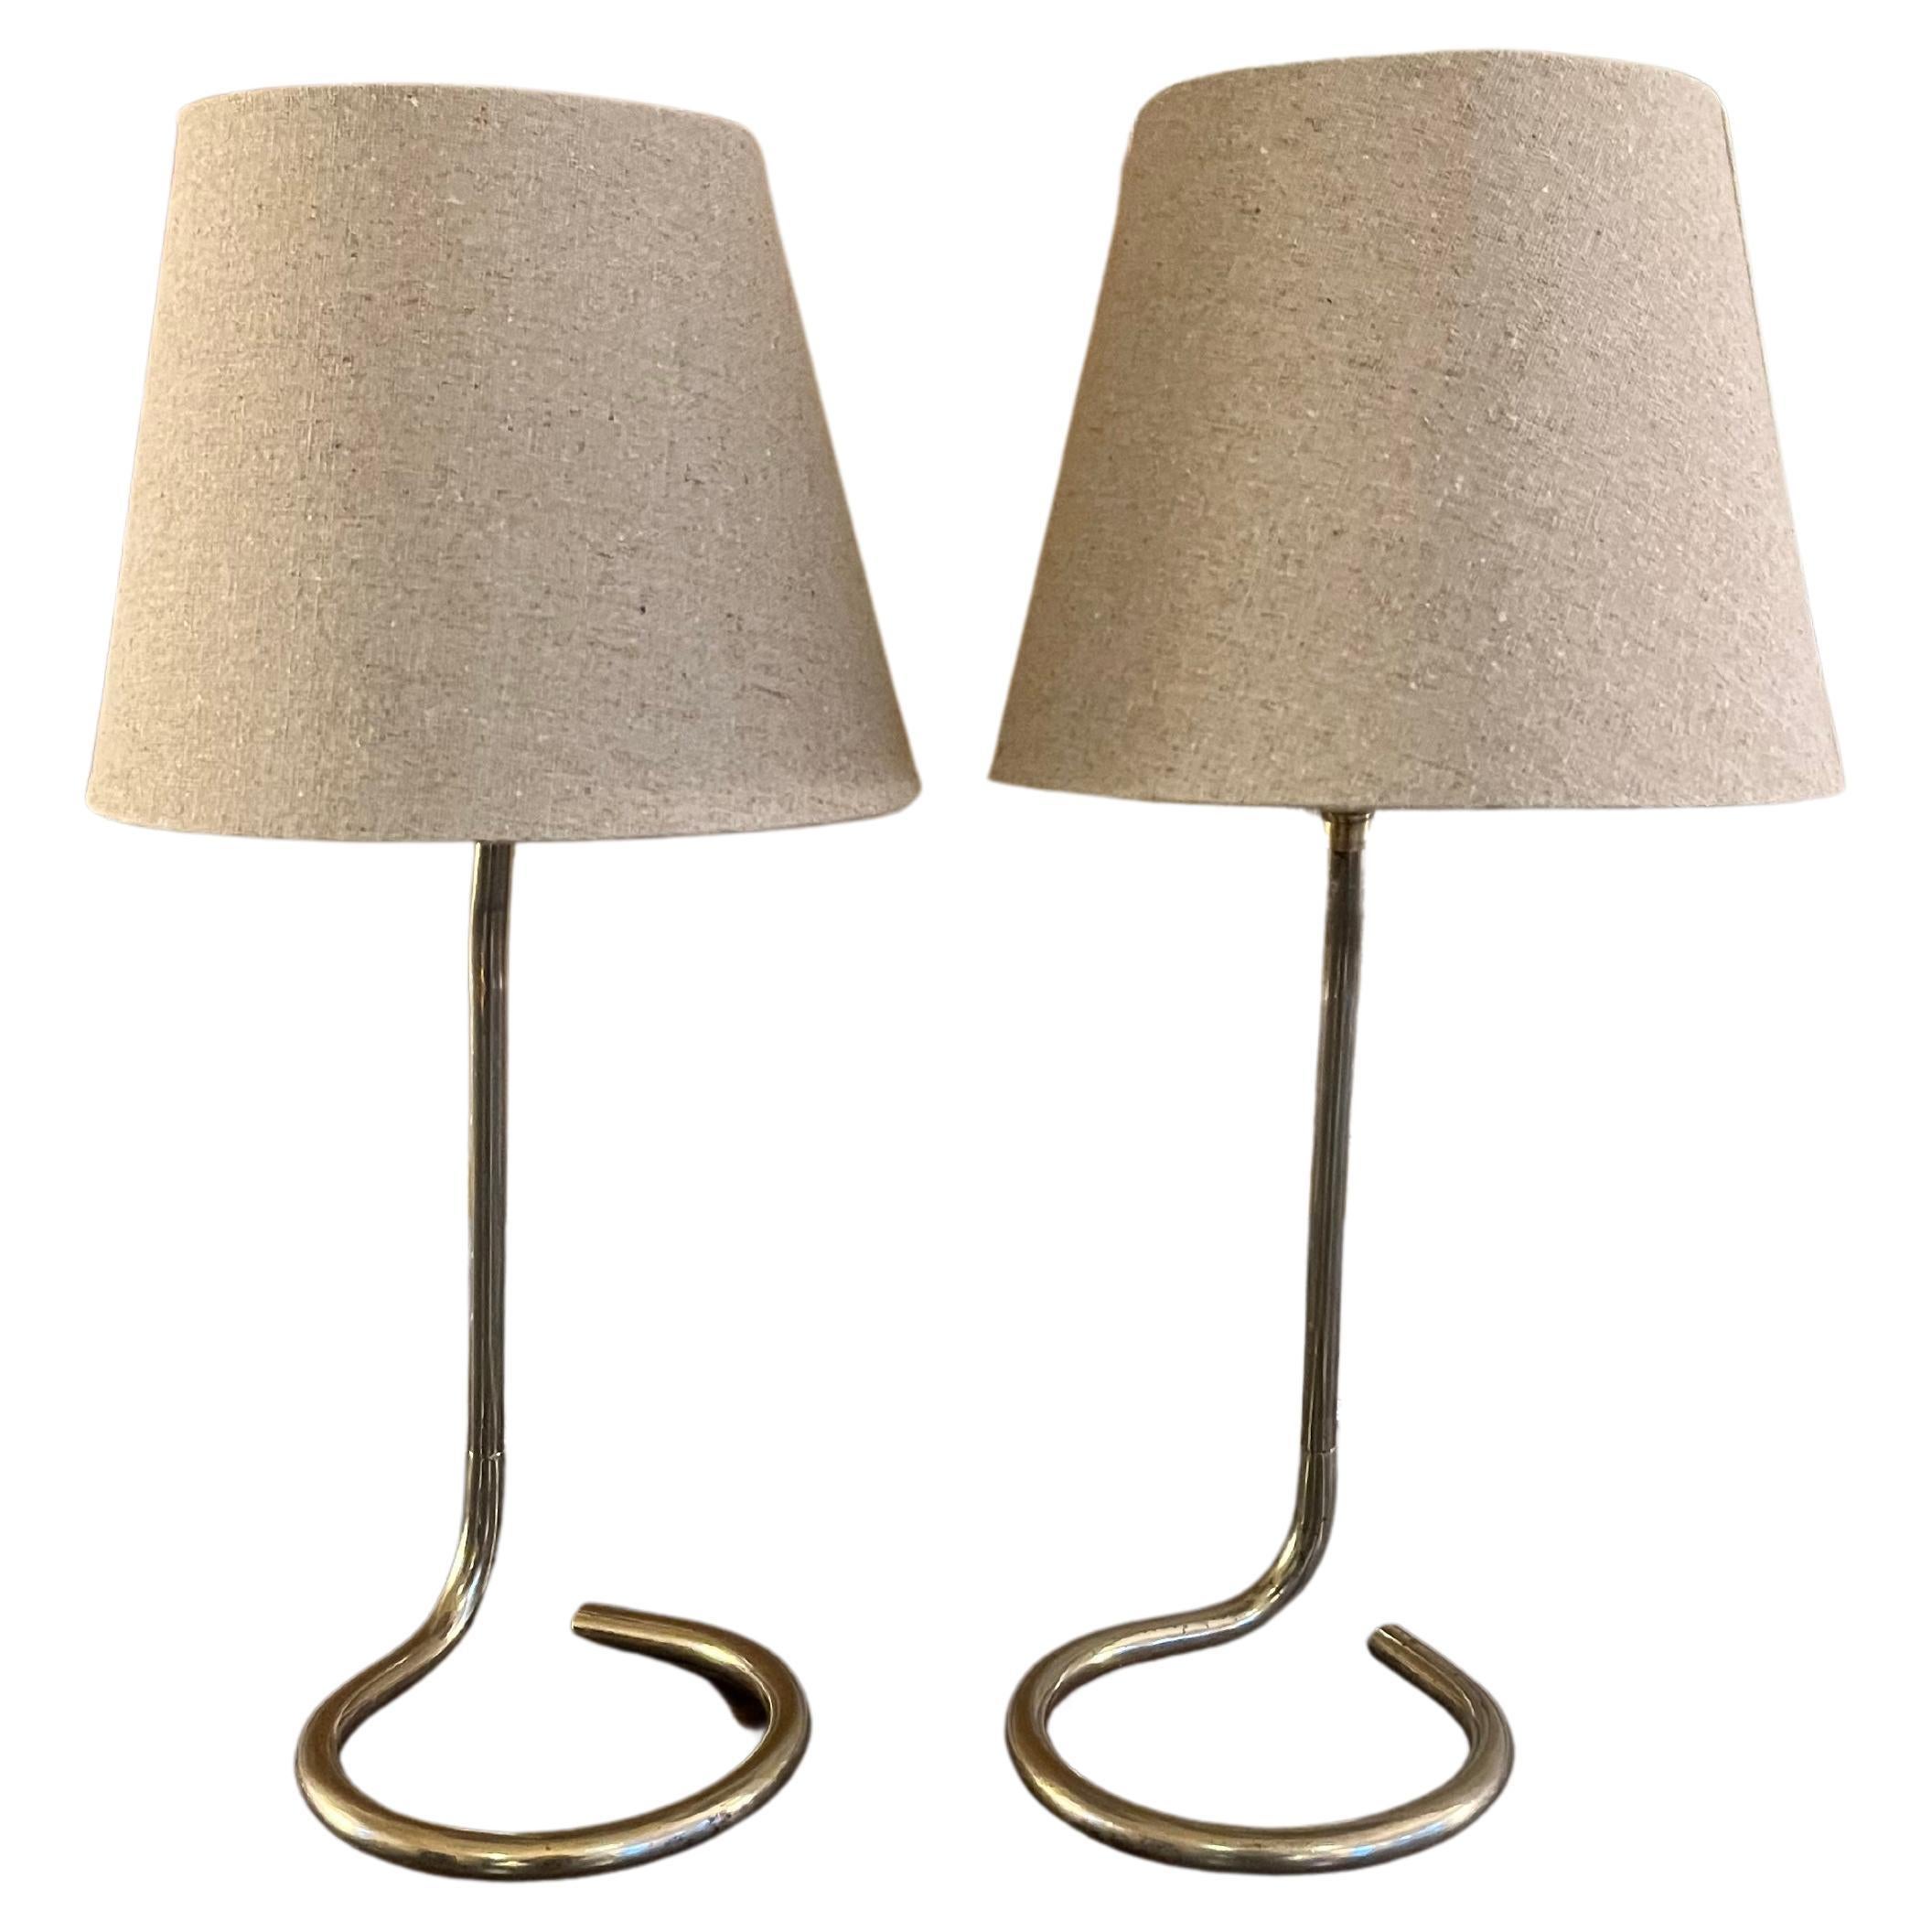 Pair of small French Nickel table lamps